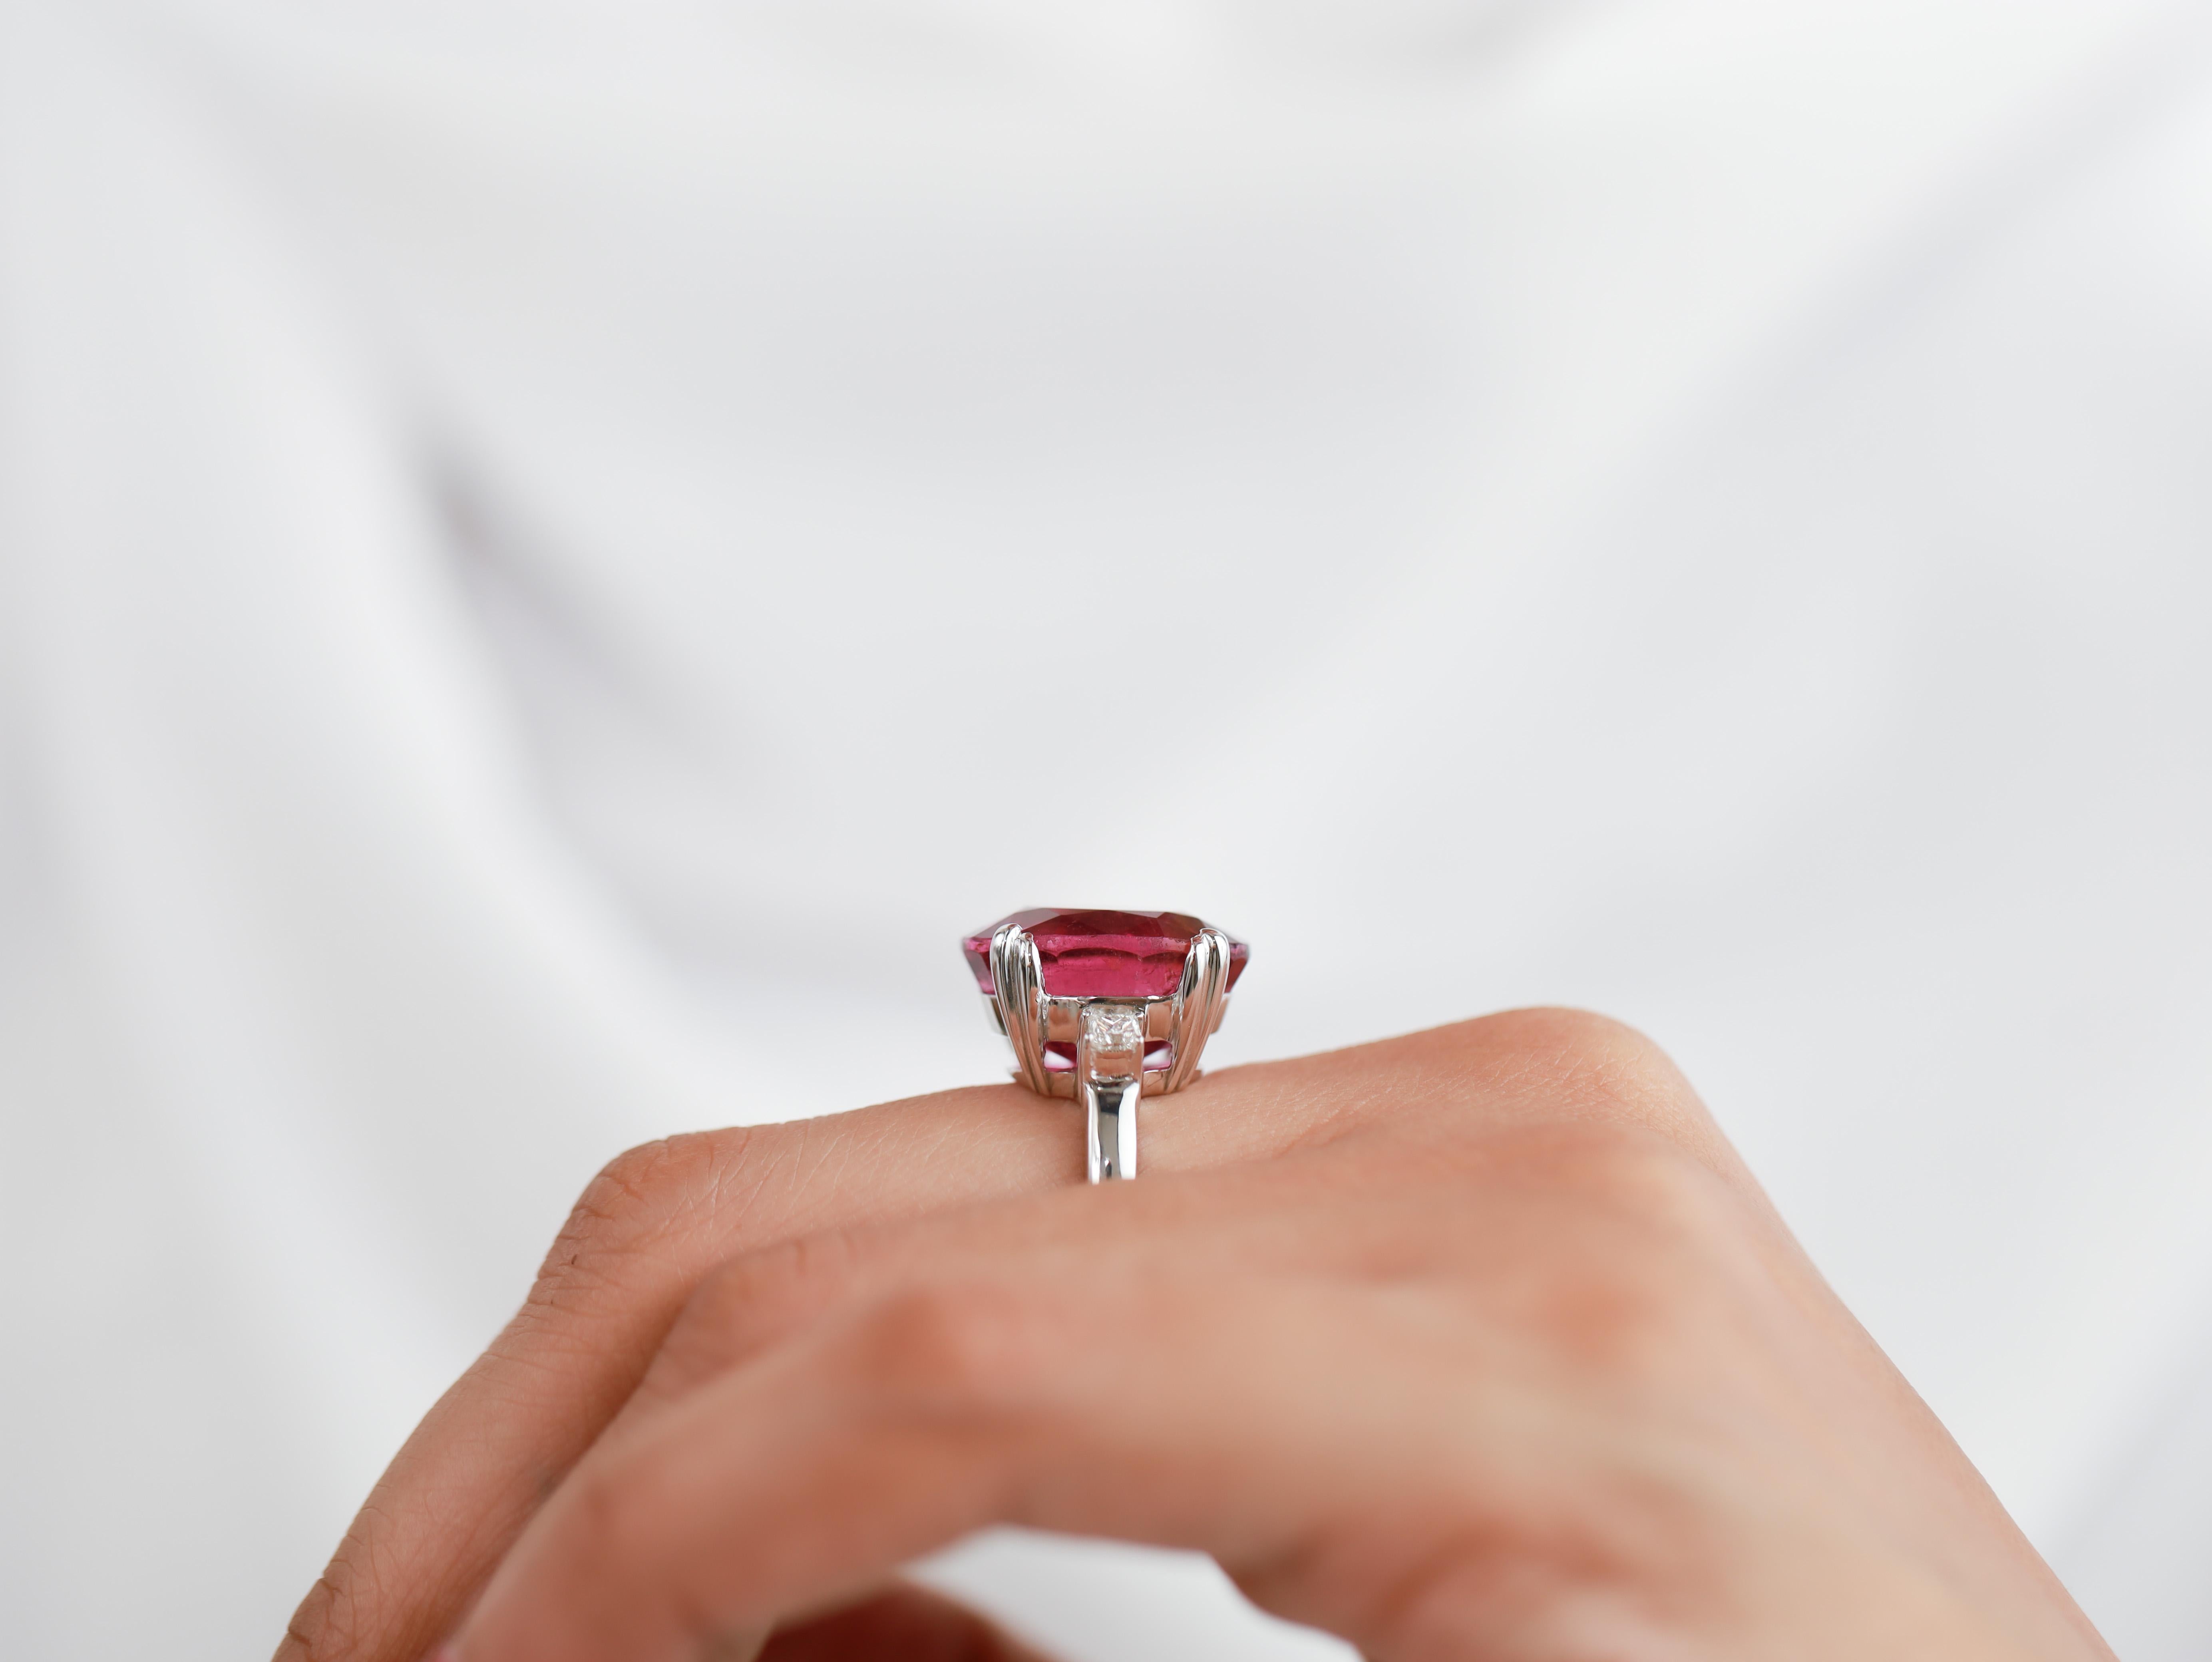 8 Carat Oval Cut Rubellite Tourmaline with 1 Ct Diamonds Cocktail Ring 18k White For Sale 2